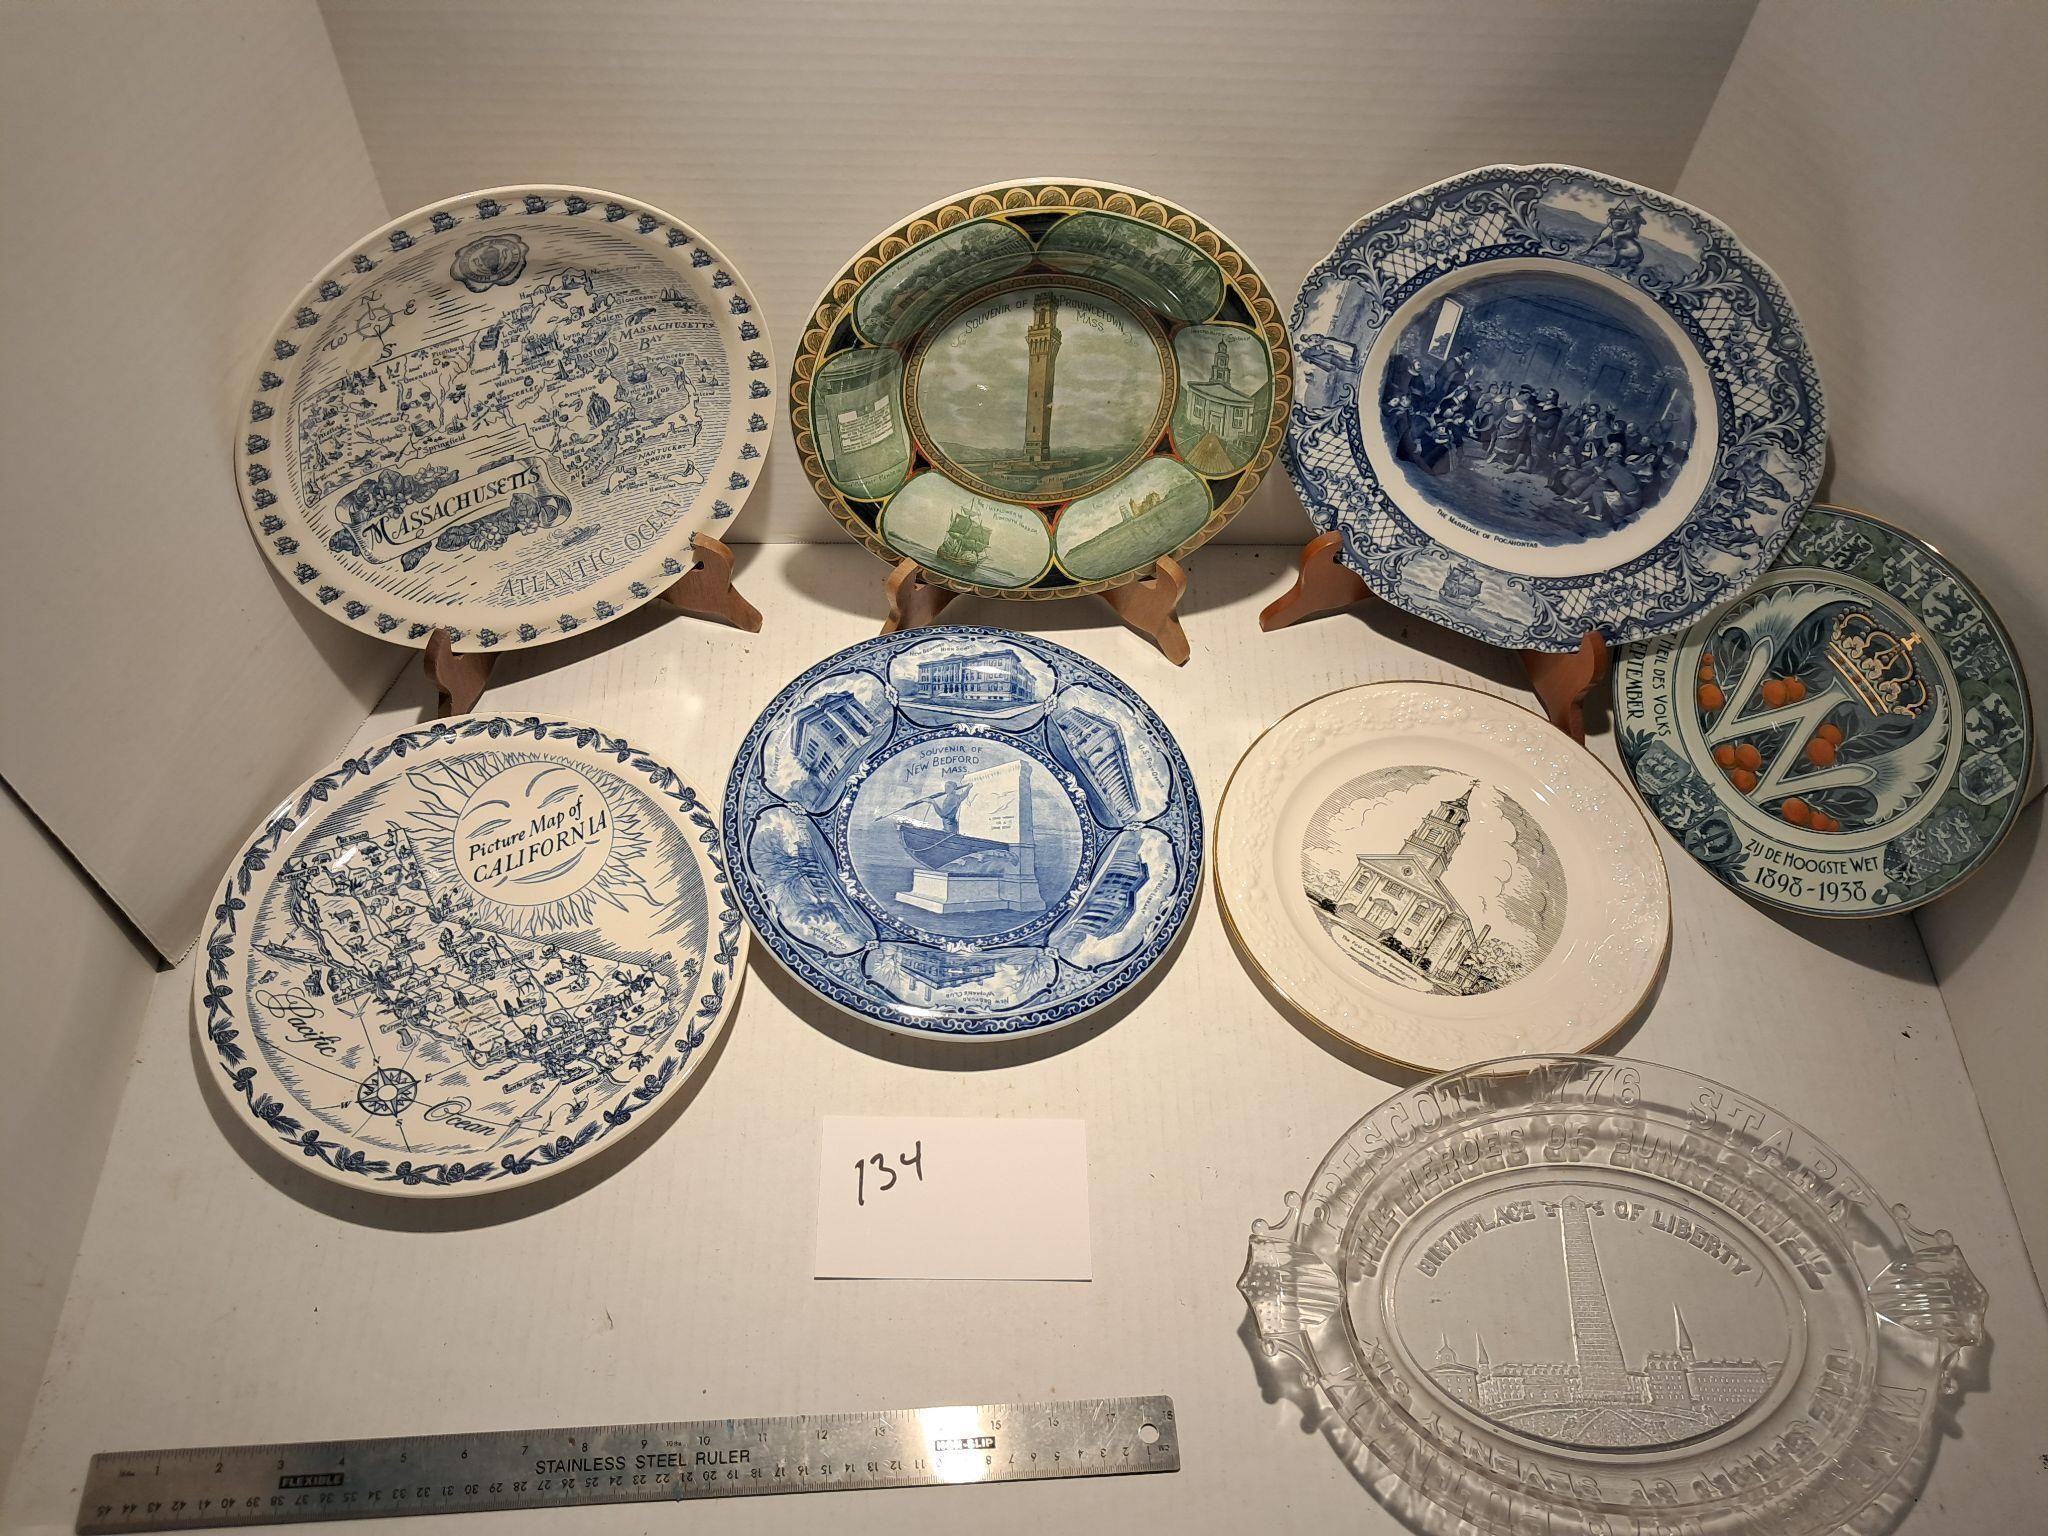 Plates with stand